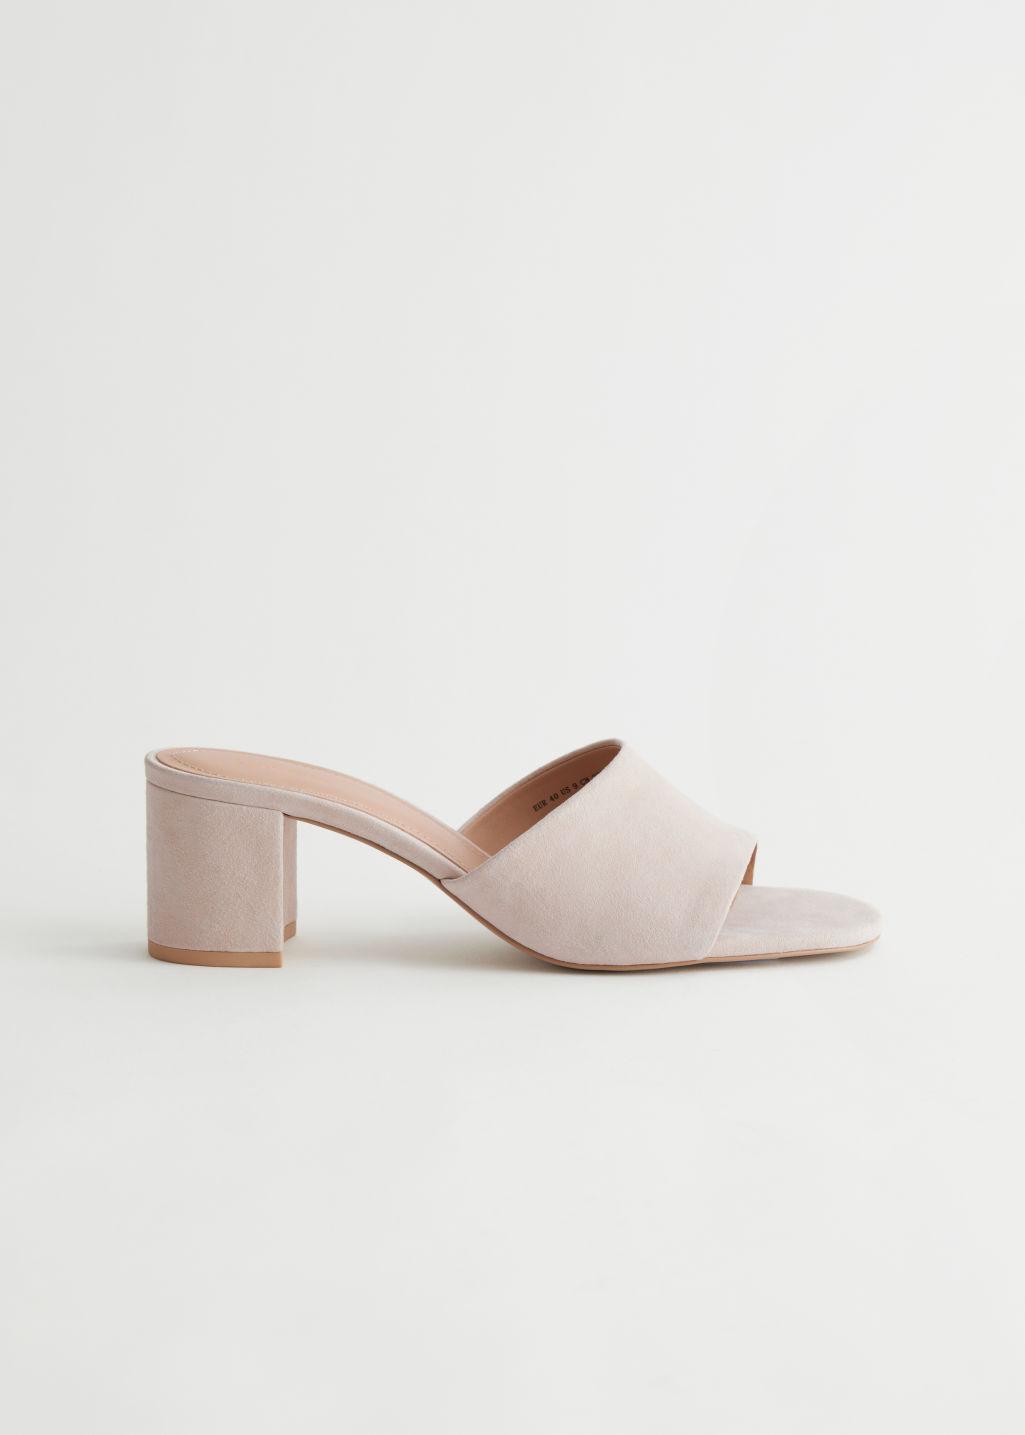 & Other Stories Suede Block Heel Mule Sandals in White | Lyst